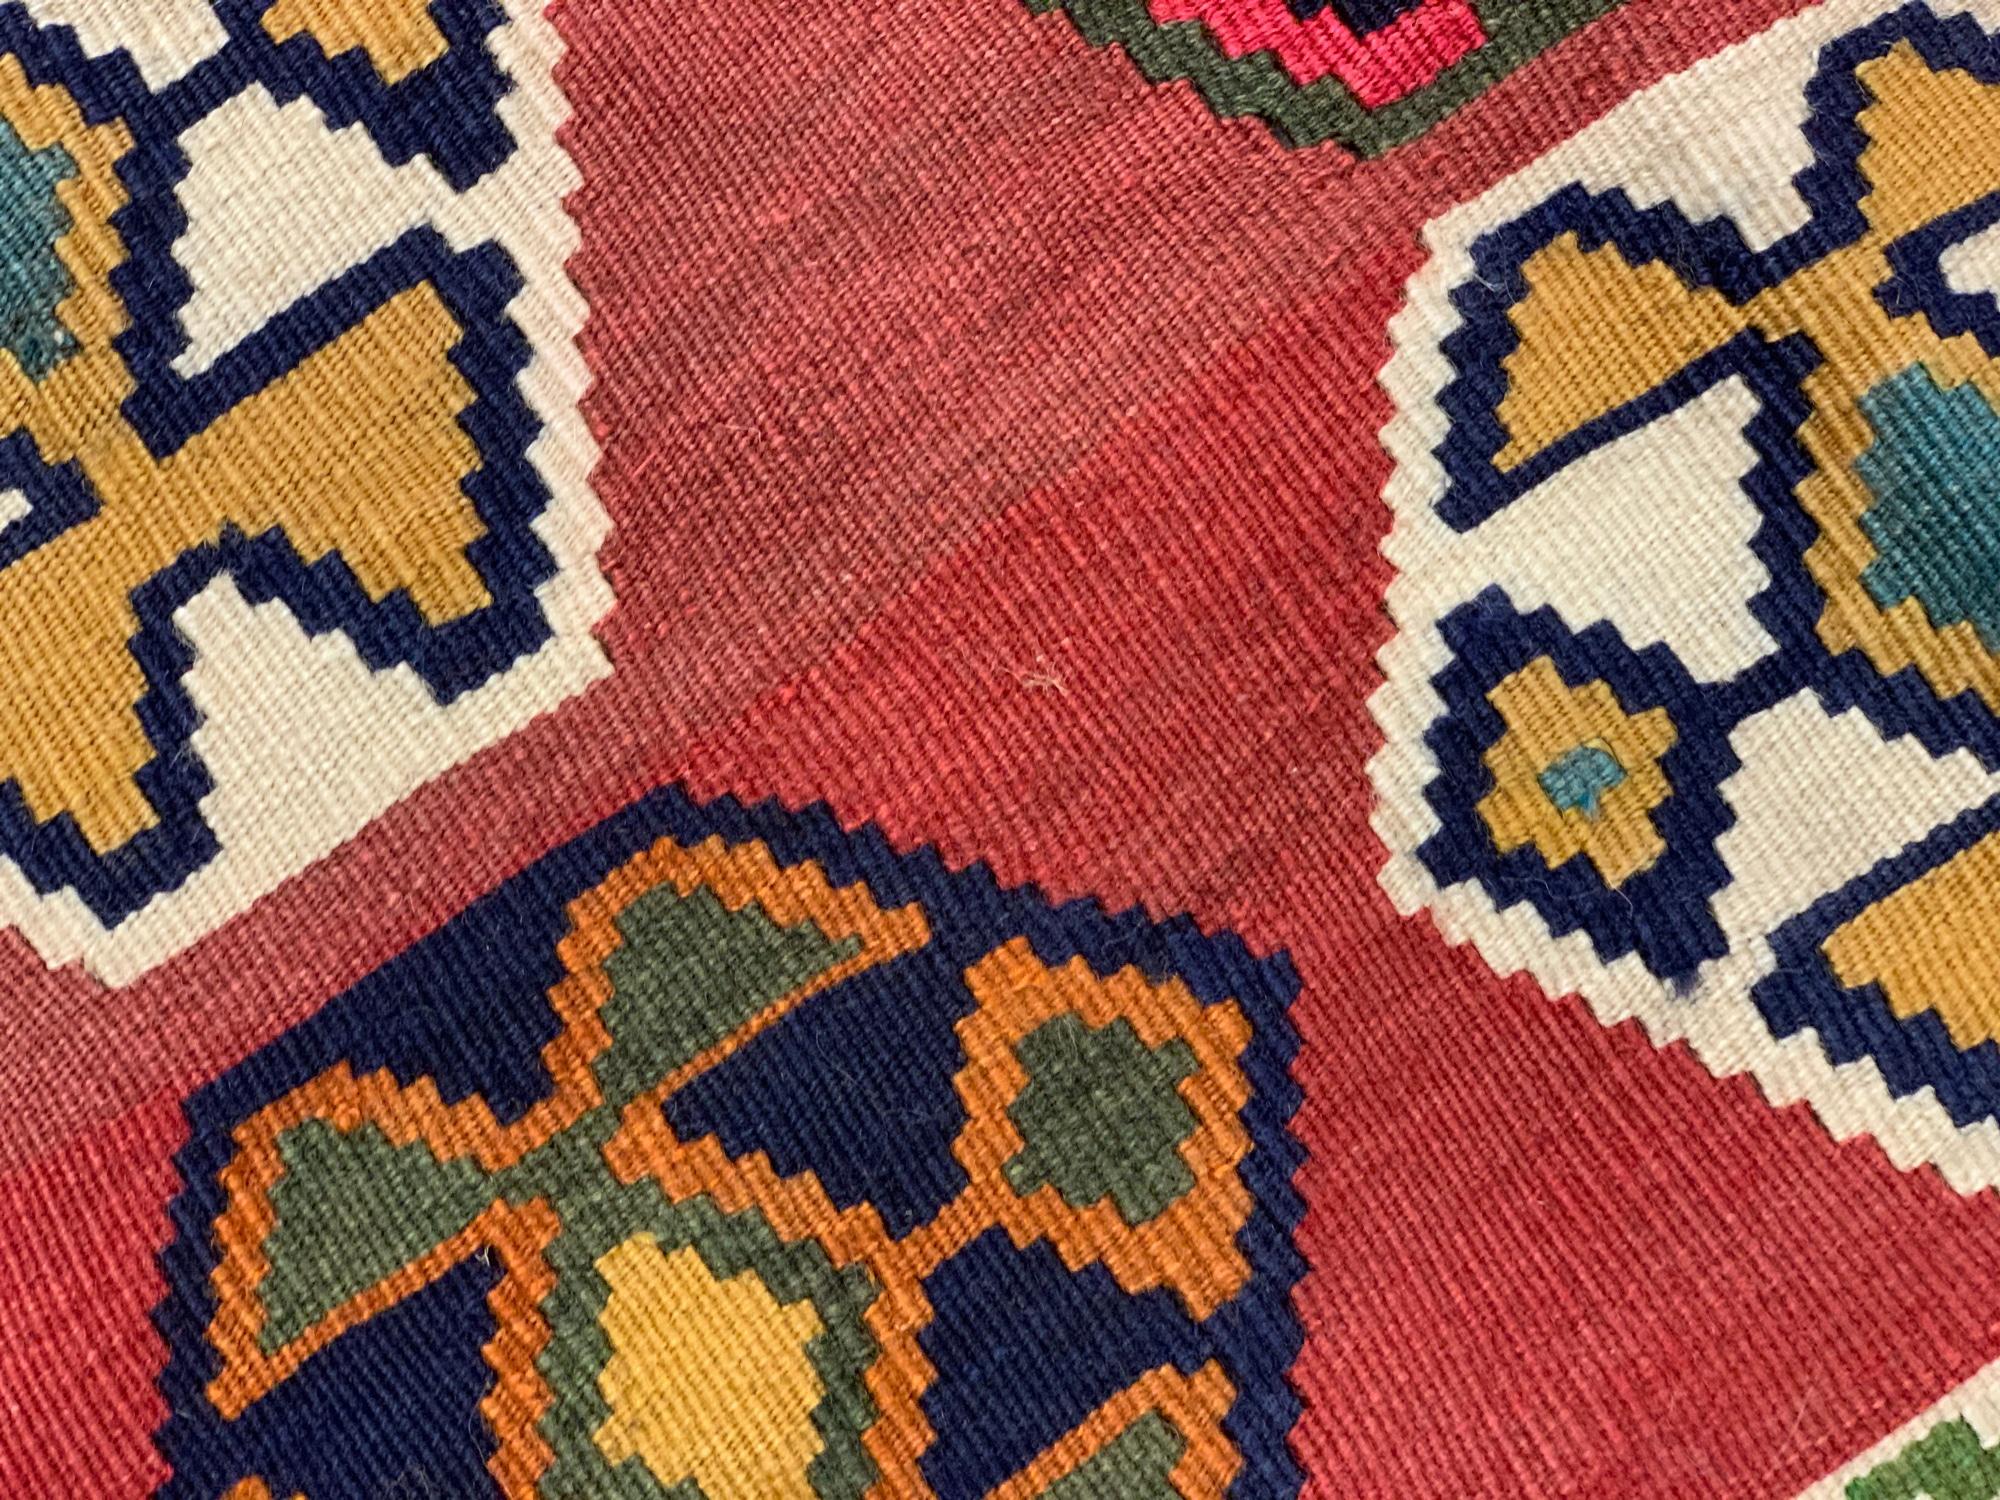 Antique Qashqai Kilim Rug, Wool All Over Pattern Kelim In Excellent Condition For Sale In Hampshire, GB